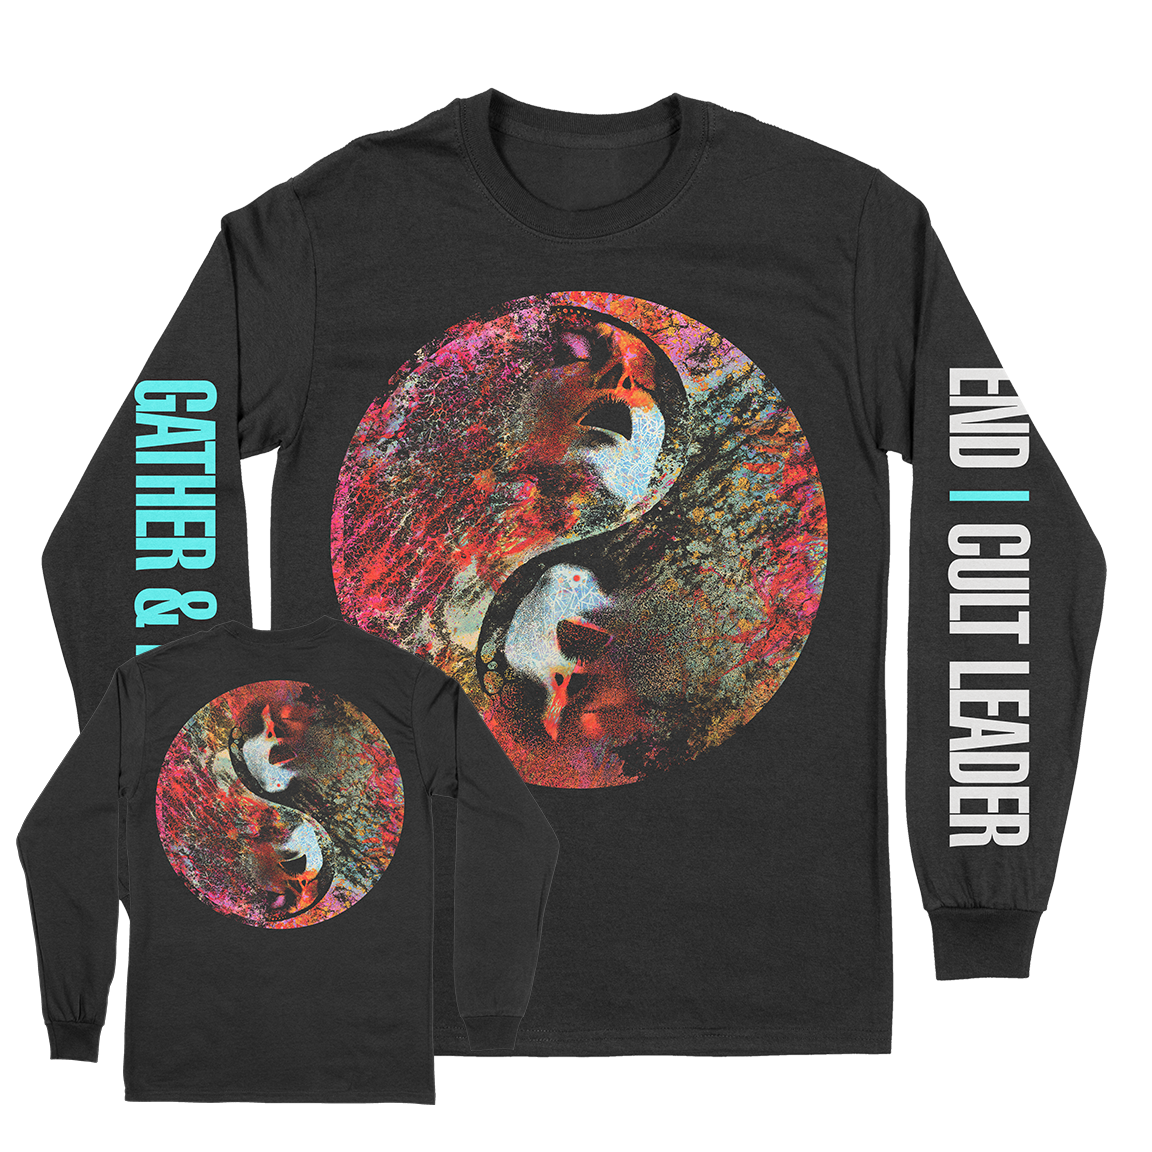 END - Gather & Mourn Long Sleeve Full Color